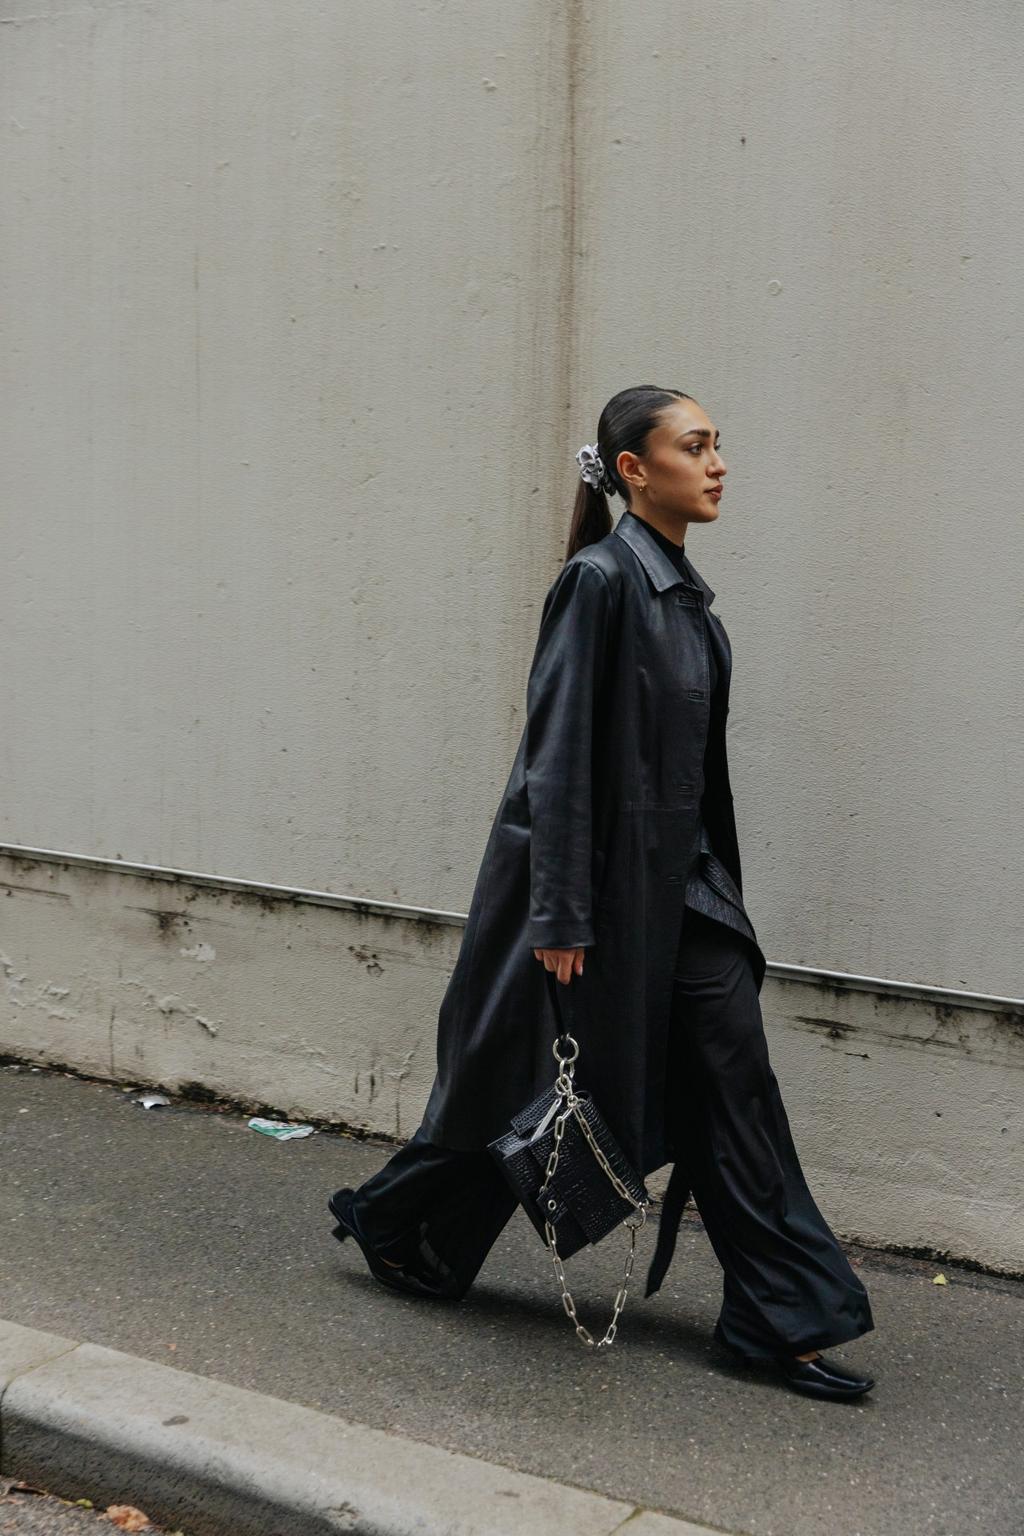 2023 Melbourne Fashion Week: The Best Street Style We've Spotted